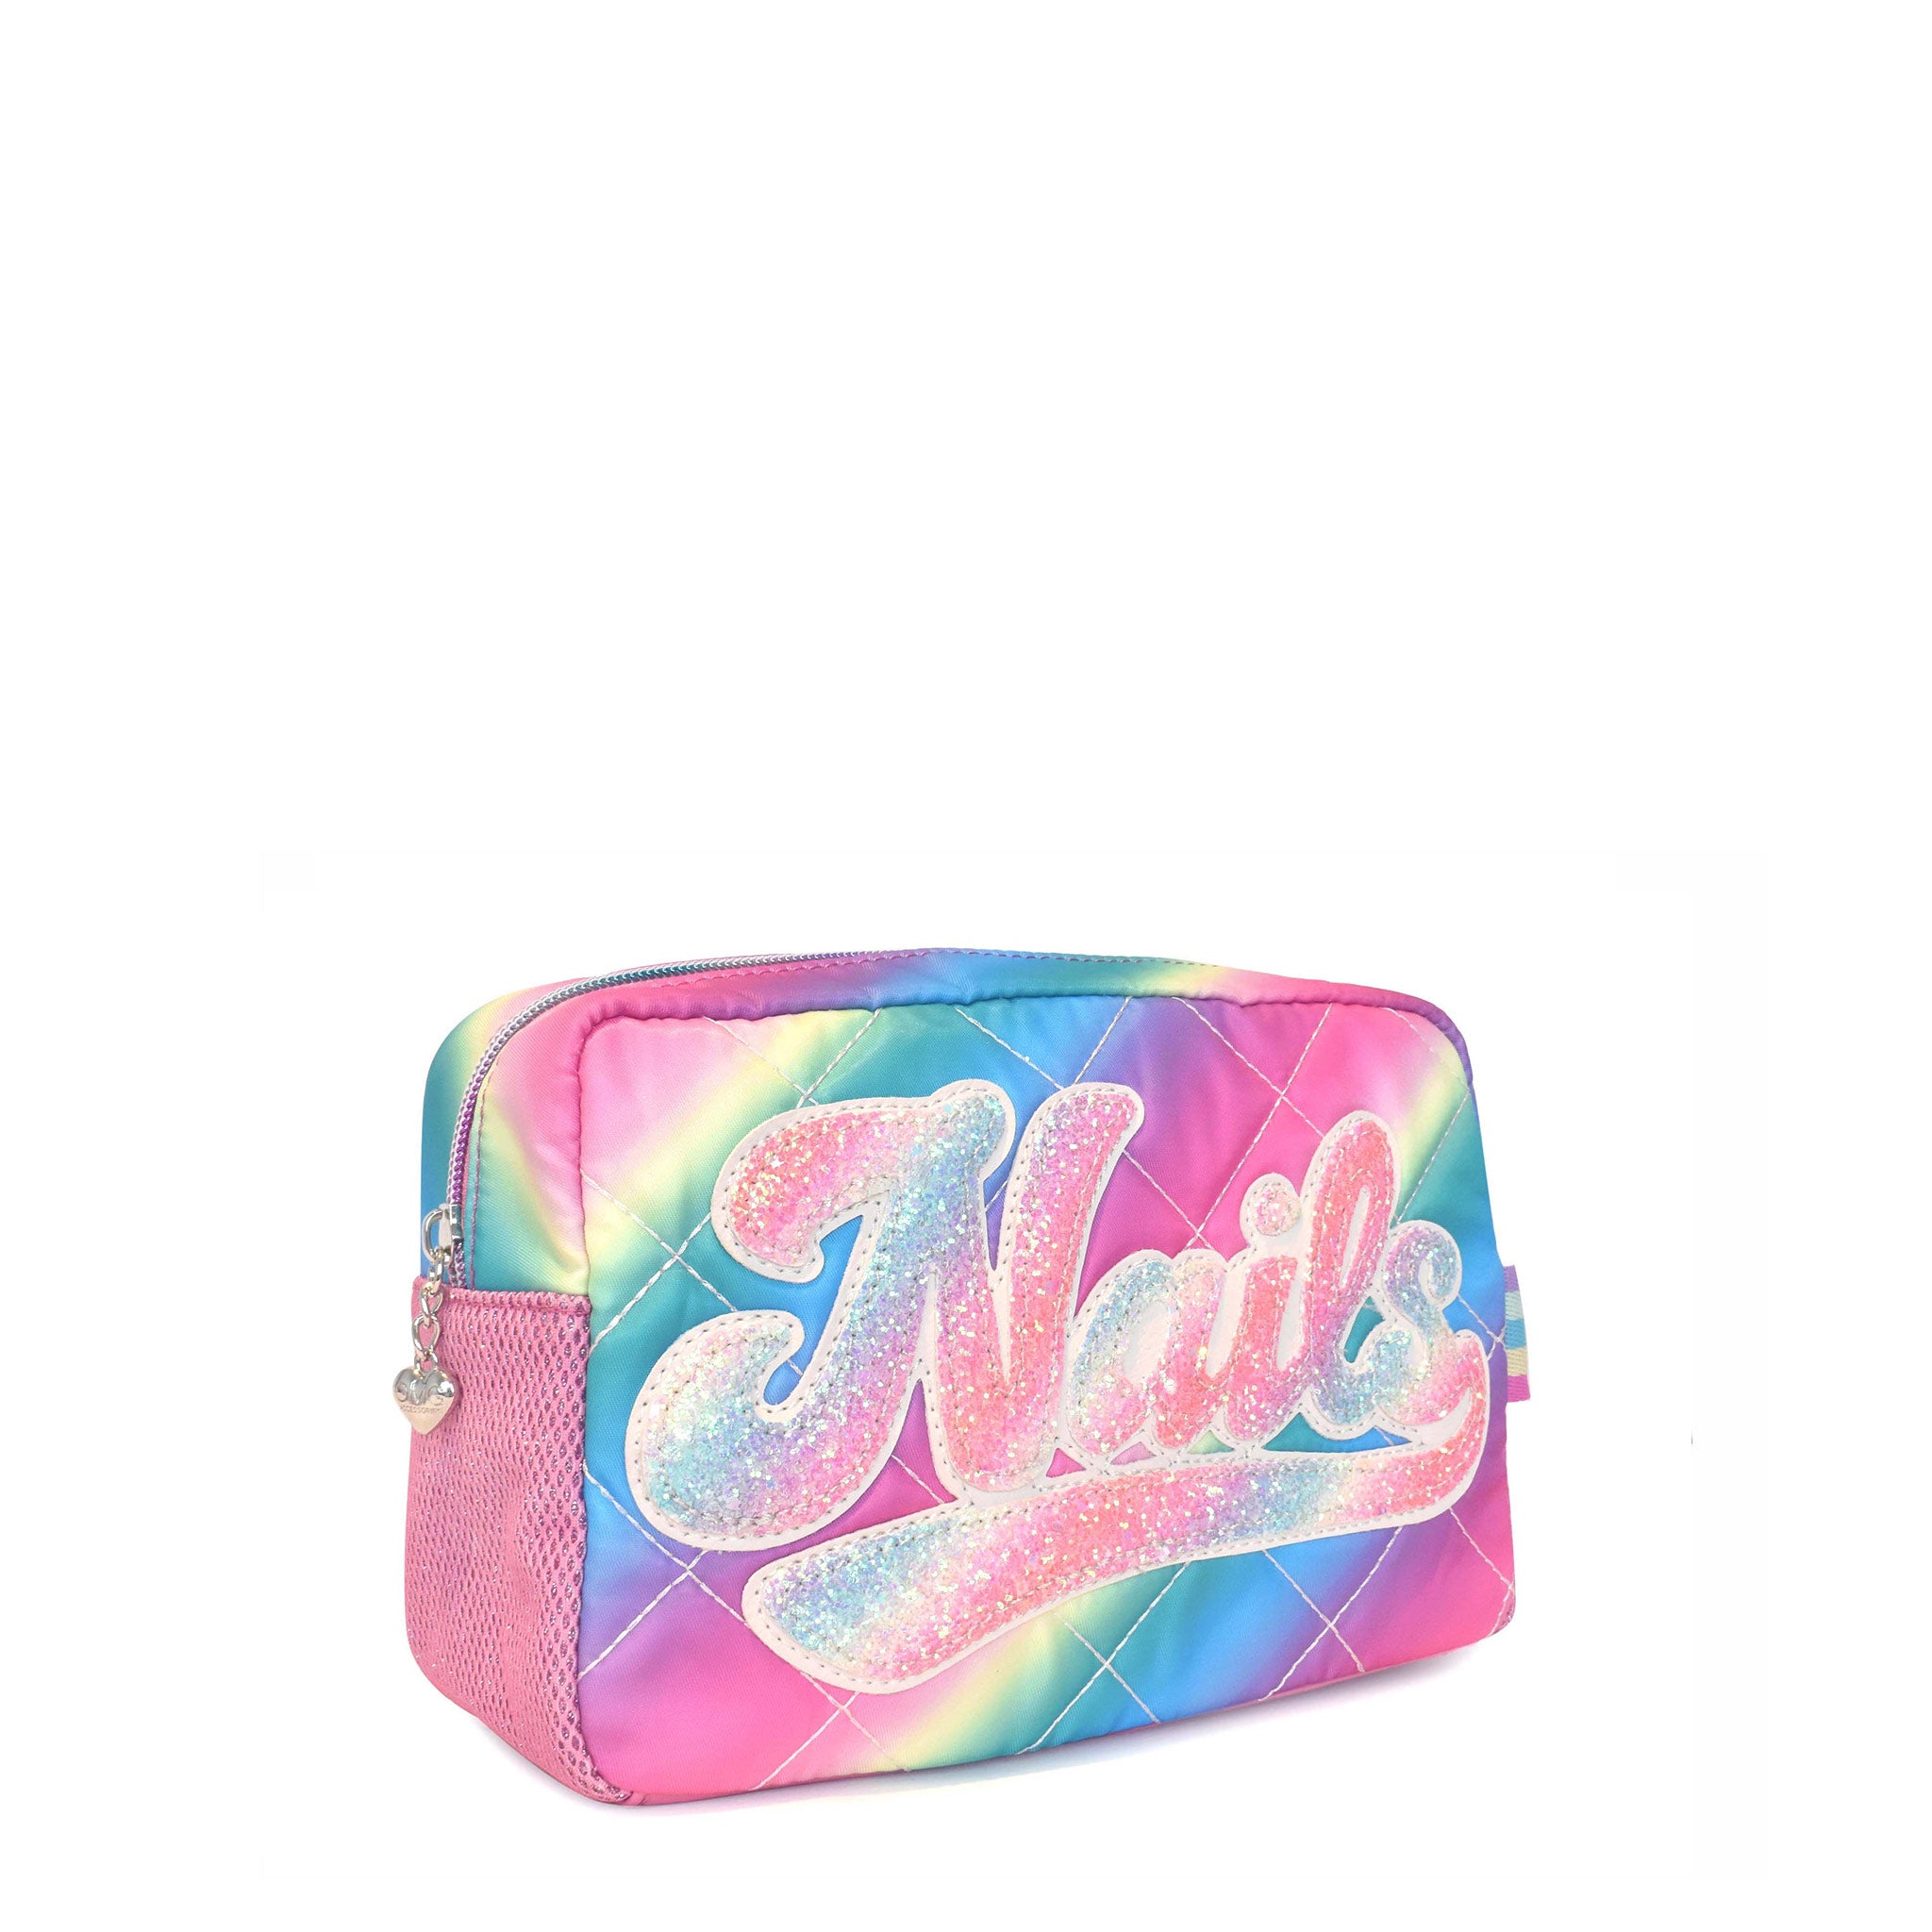 Side view of a rainbow ombre quilted pouch with glitter retro-inspired script 'NAILS' applique